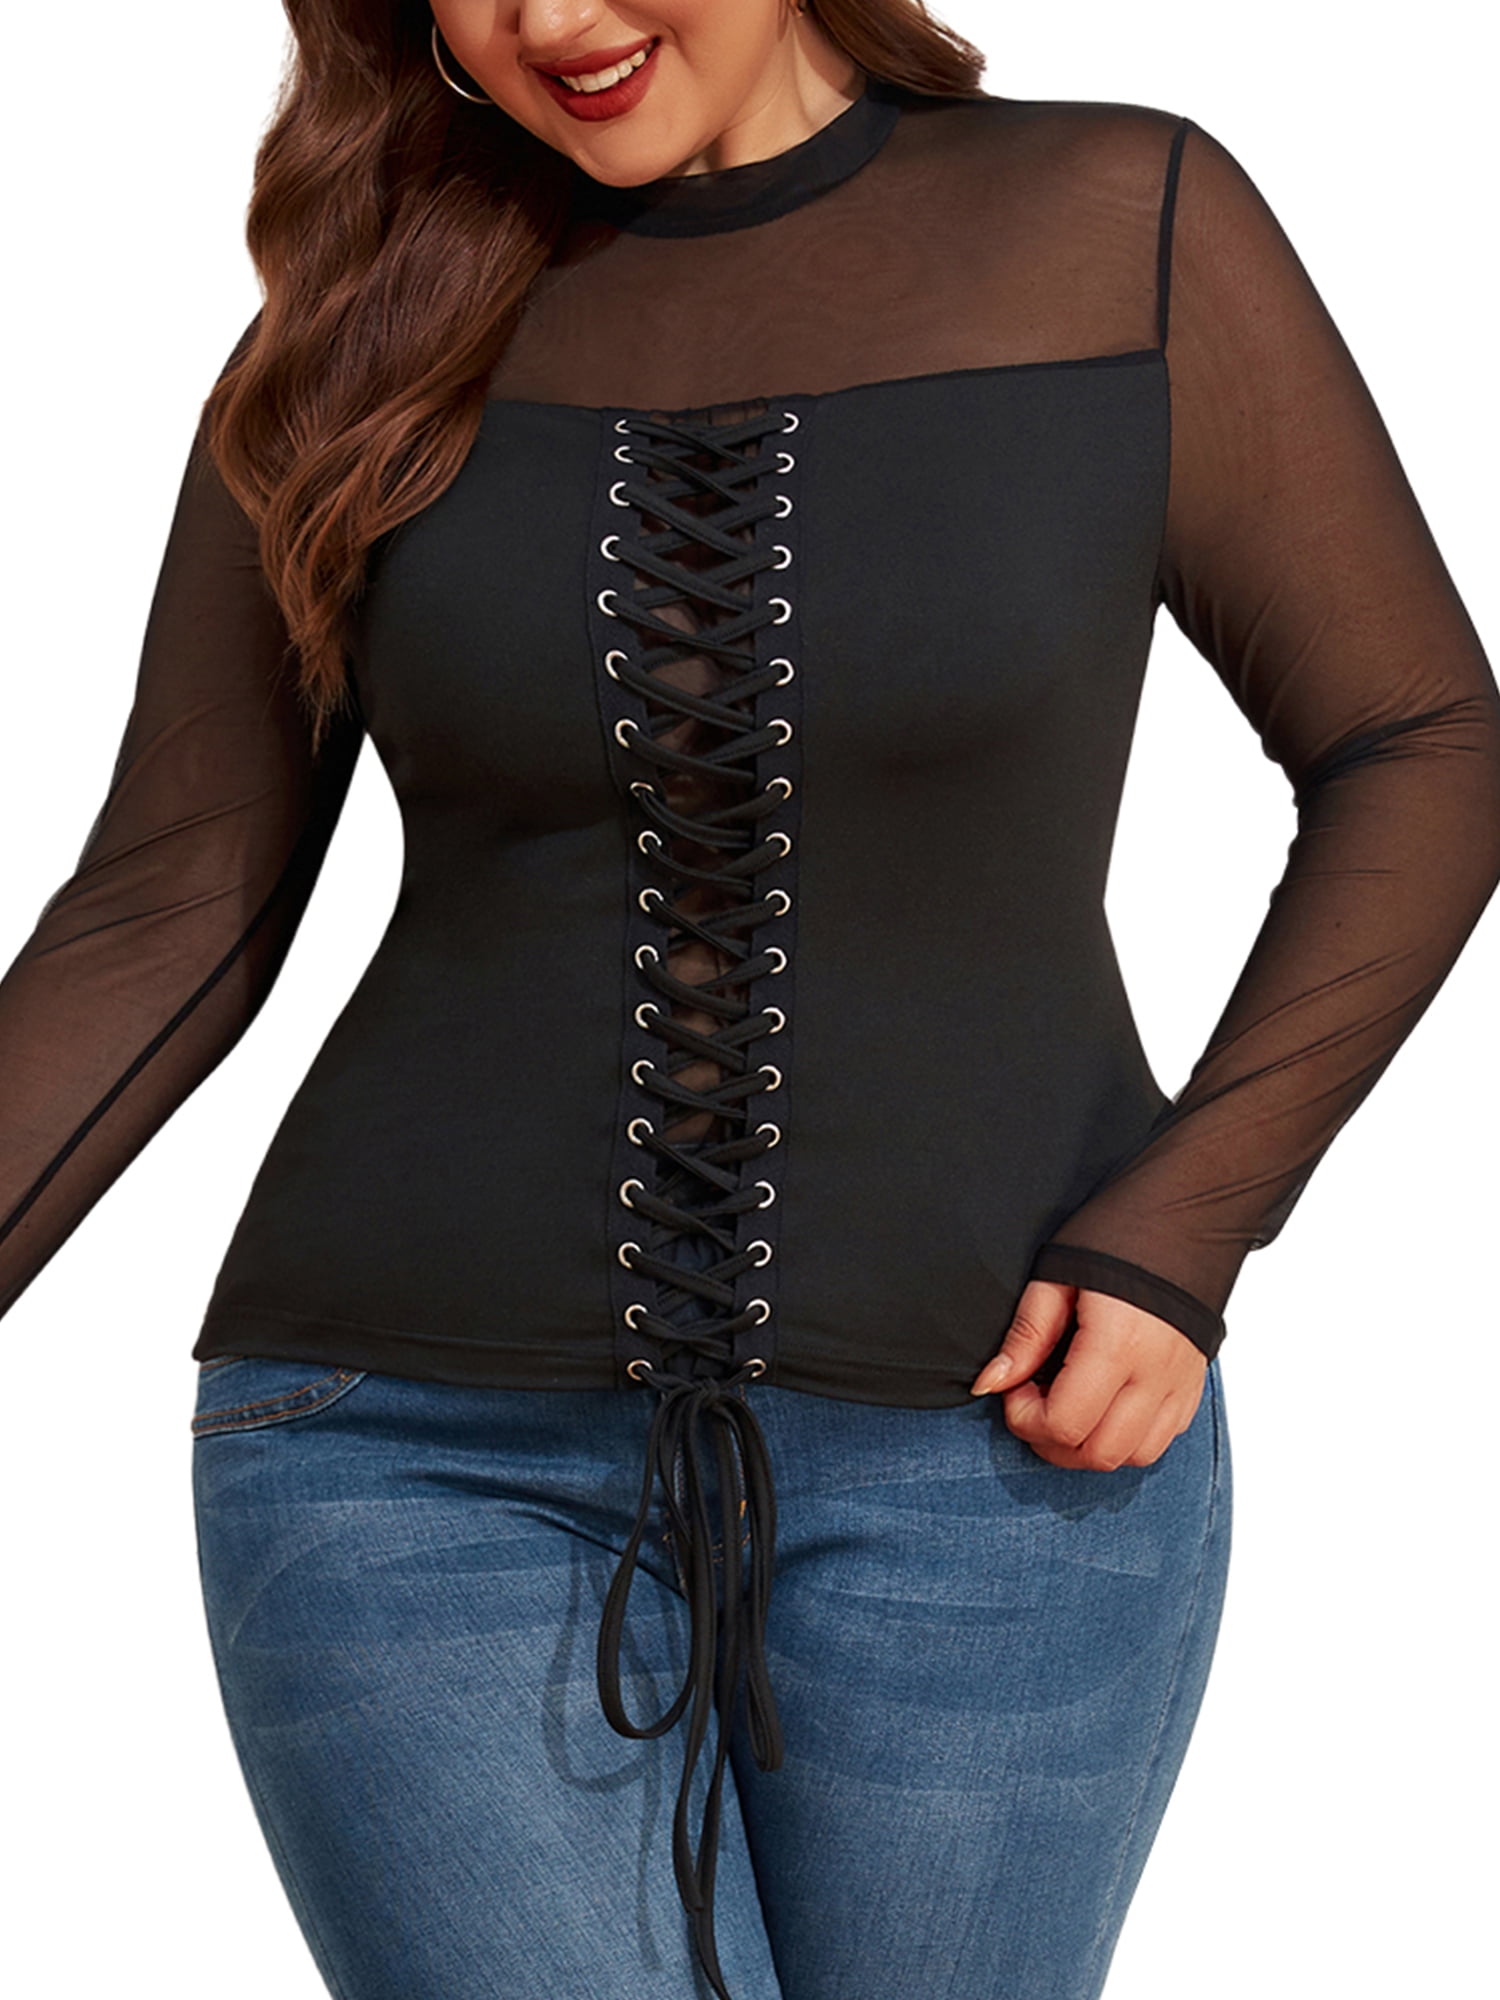 LAPA Women's Plus Size Sexy See Through Long Sleeve Tops 